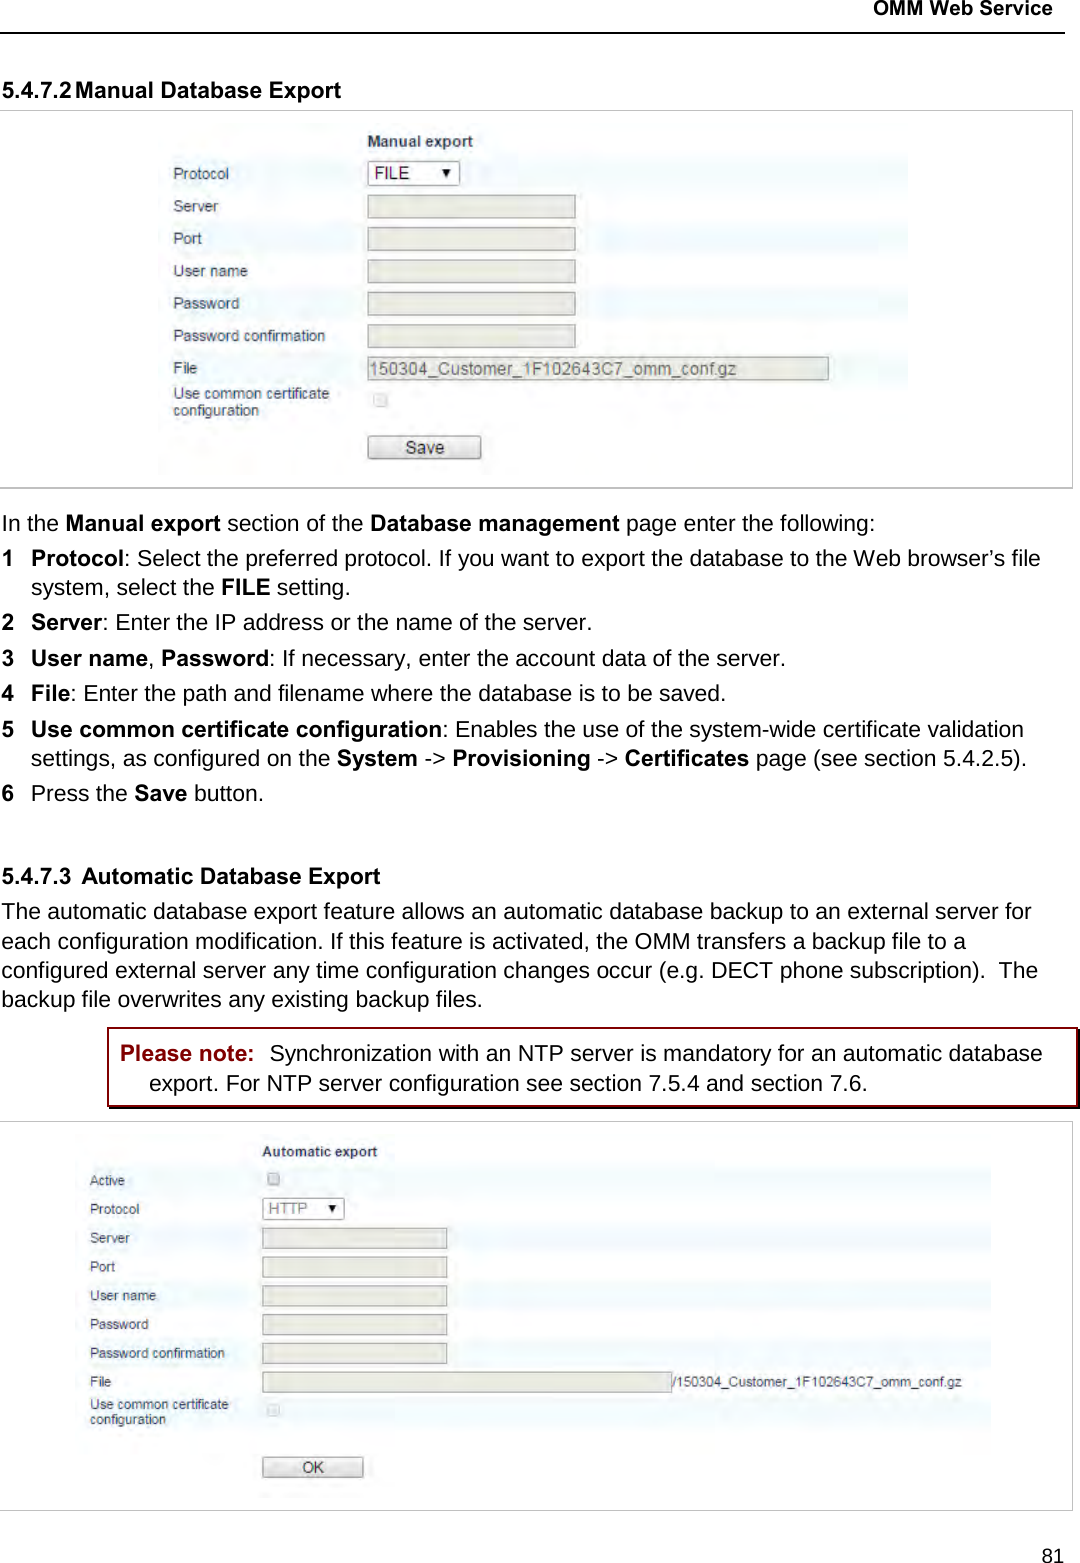  OMM Web Service  81 5.4.7.2 Manual Database Export  In the Manual export section of the Database management page enter the following:  1  Protocol: Select the preferred protocol. If you want to export the database to the Web browser’s file system, select the FILE setting. 2  Server: Enter the IP address or the name of the server. 3  User name, Password: If necessary, enter the account data of the server. 4  File: Enter the path and filename where the database is to be saved. 5  Use common certificate configuration: Enables the use of the system-wide certificate validation settings, as configured on the System -&gt; Provisioning -&gt; Certificates page (see section 5.4.2.5). 6  Press the Save button.  5.4.7.3  Automatic Database Export The automatic database export feature allows an automatic database backup to an external server for each configuration modification. If this feature is activated, the OMM transfers a backup file to a configured external server any time configuration changes occur (e.g. DECT phone subscription).  The backup file overwrites any existing backup files.  Please note: Synchronization with an NTP server is mandatory for an automatic database export. For NTP server configuration see section 7.5.4 and section 7.6.  